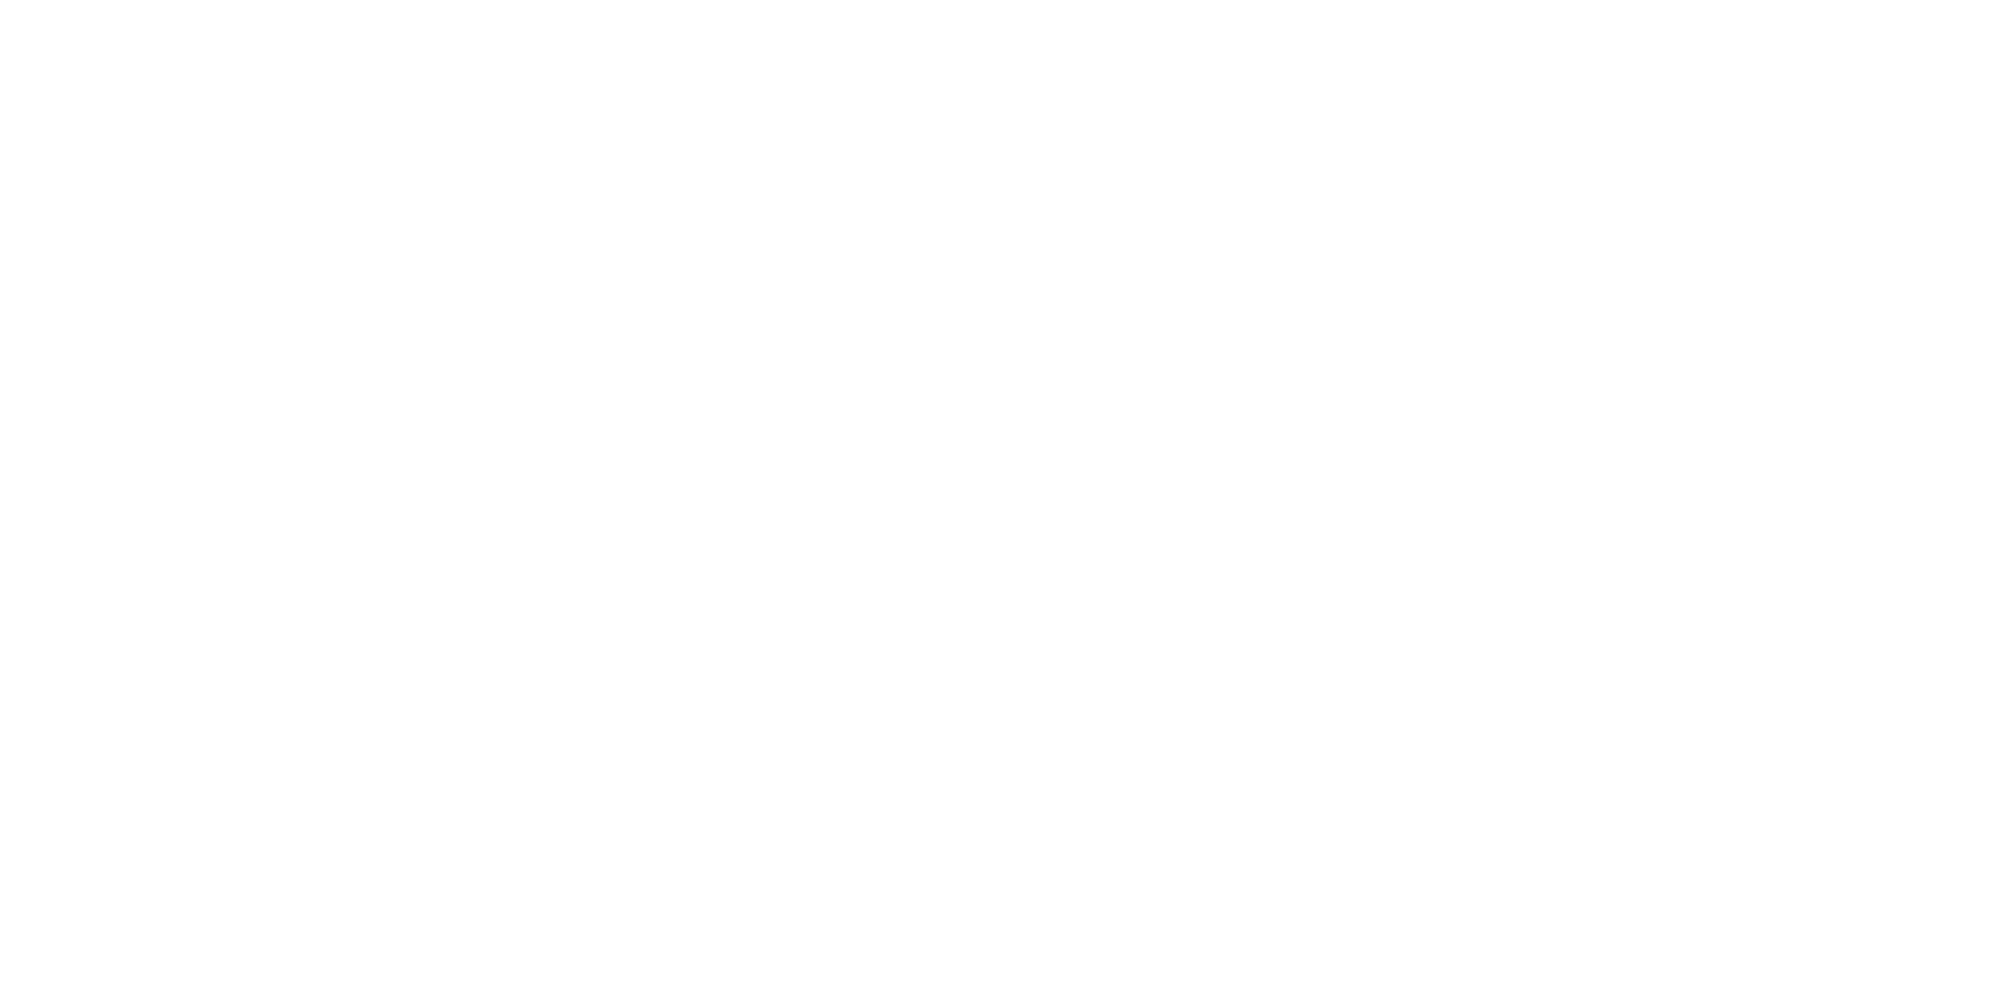 Climate Finance Day